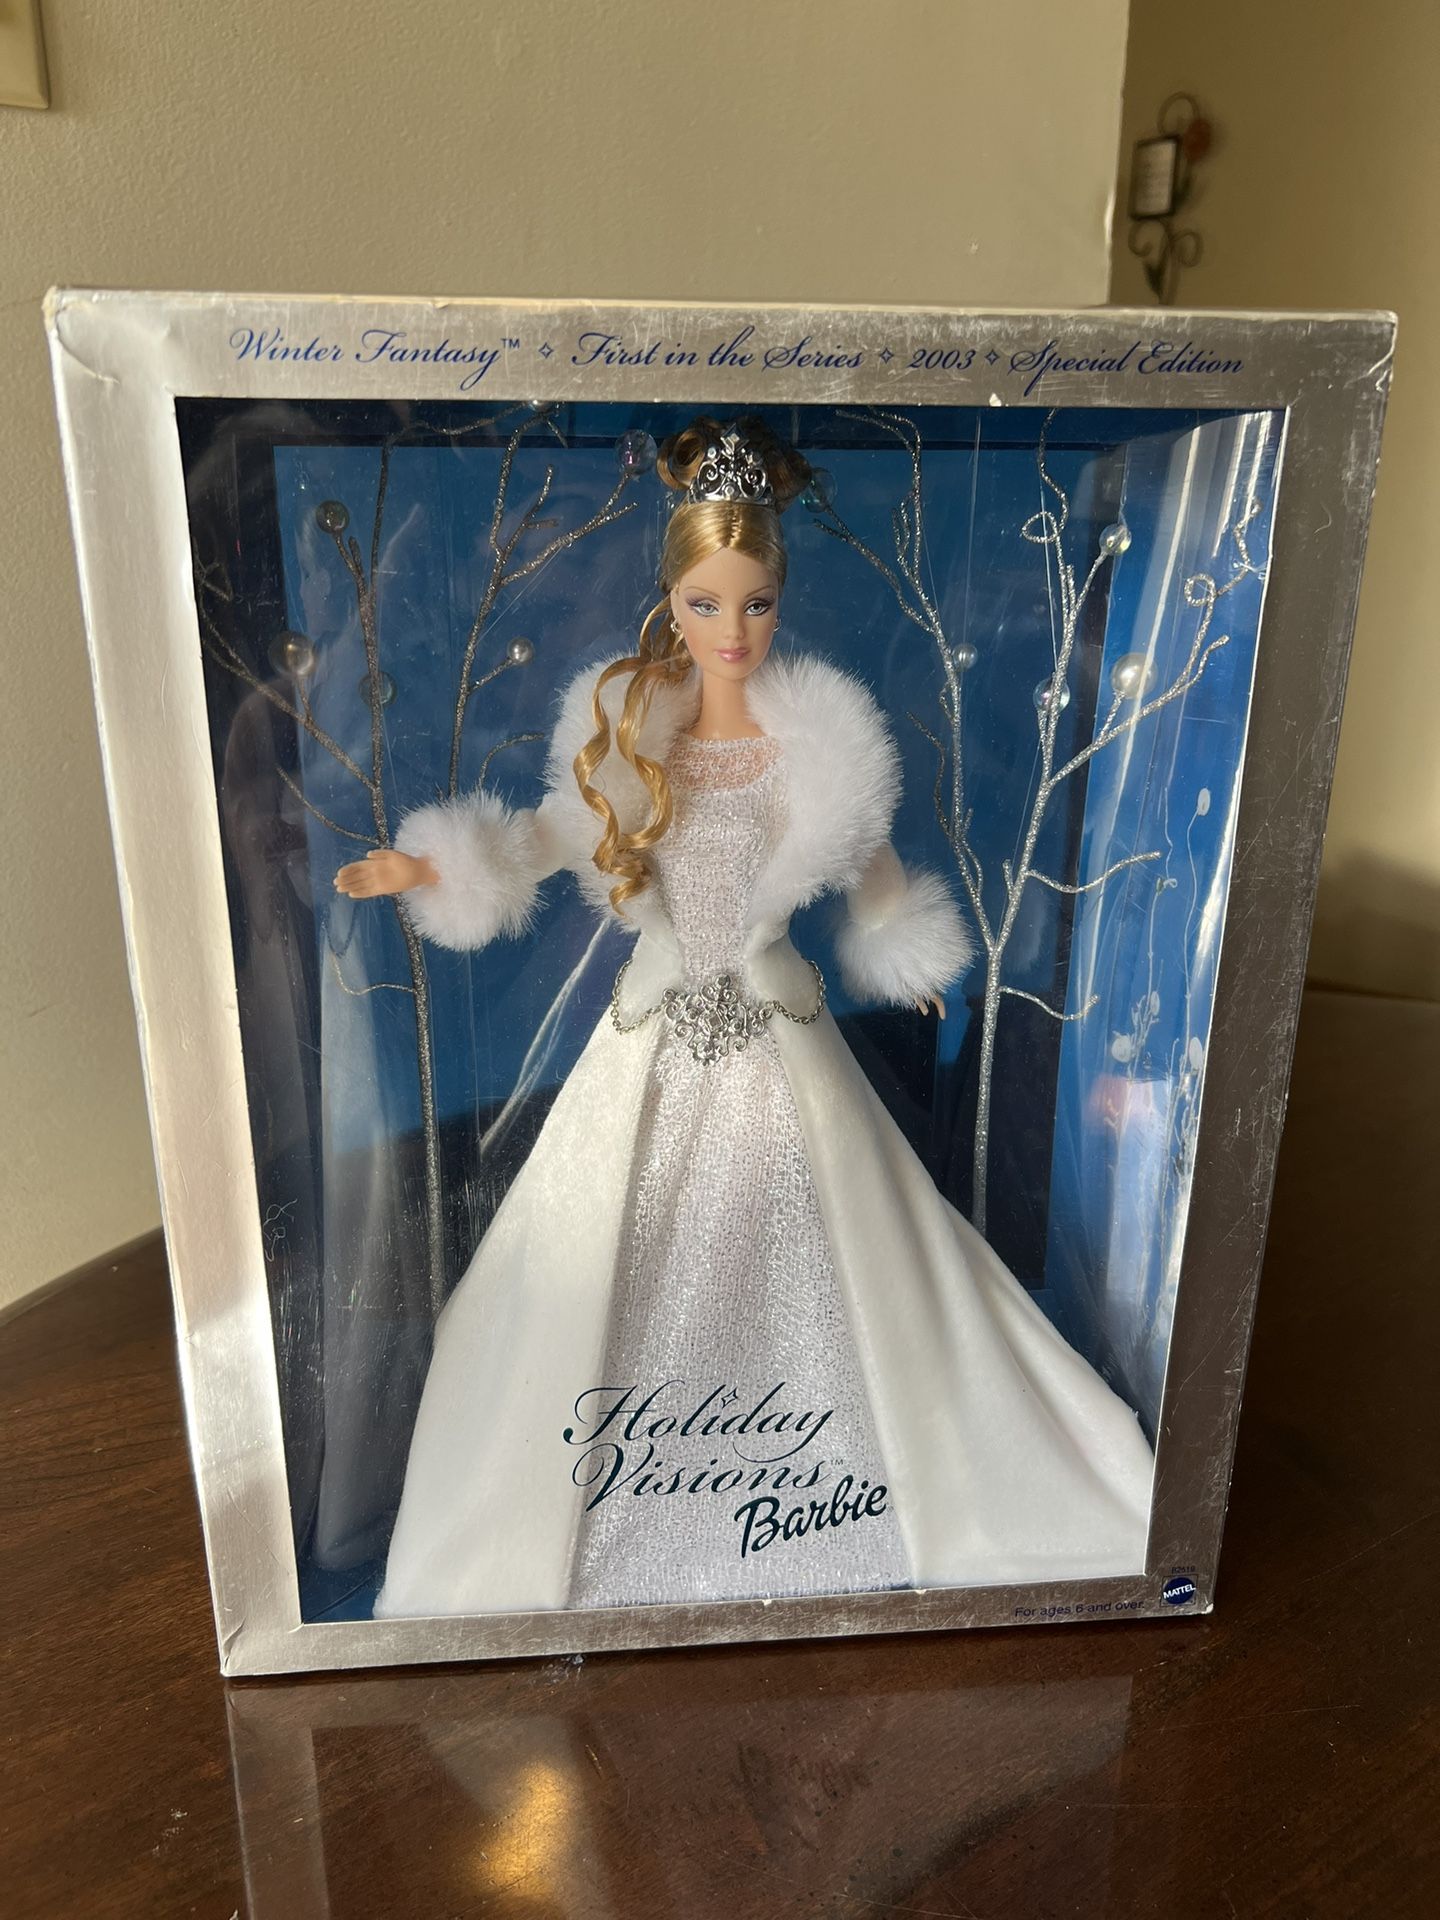 NEW 2003 Holiday Visions Barbie Doll Winter Fantasy Series Special Edition First in the Series NIB #82519 